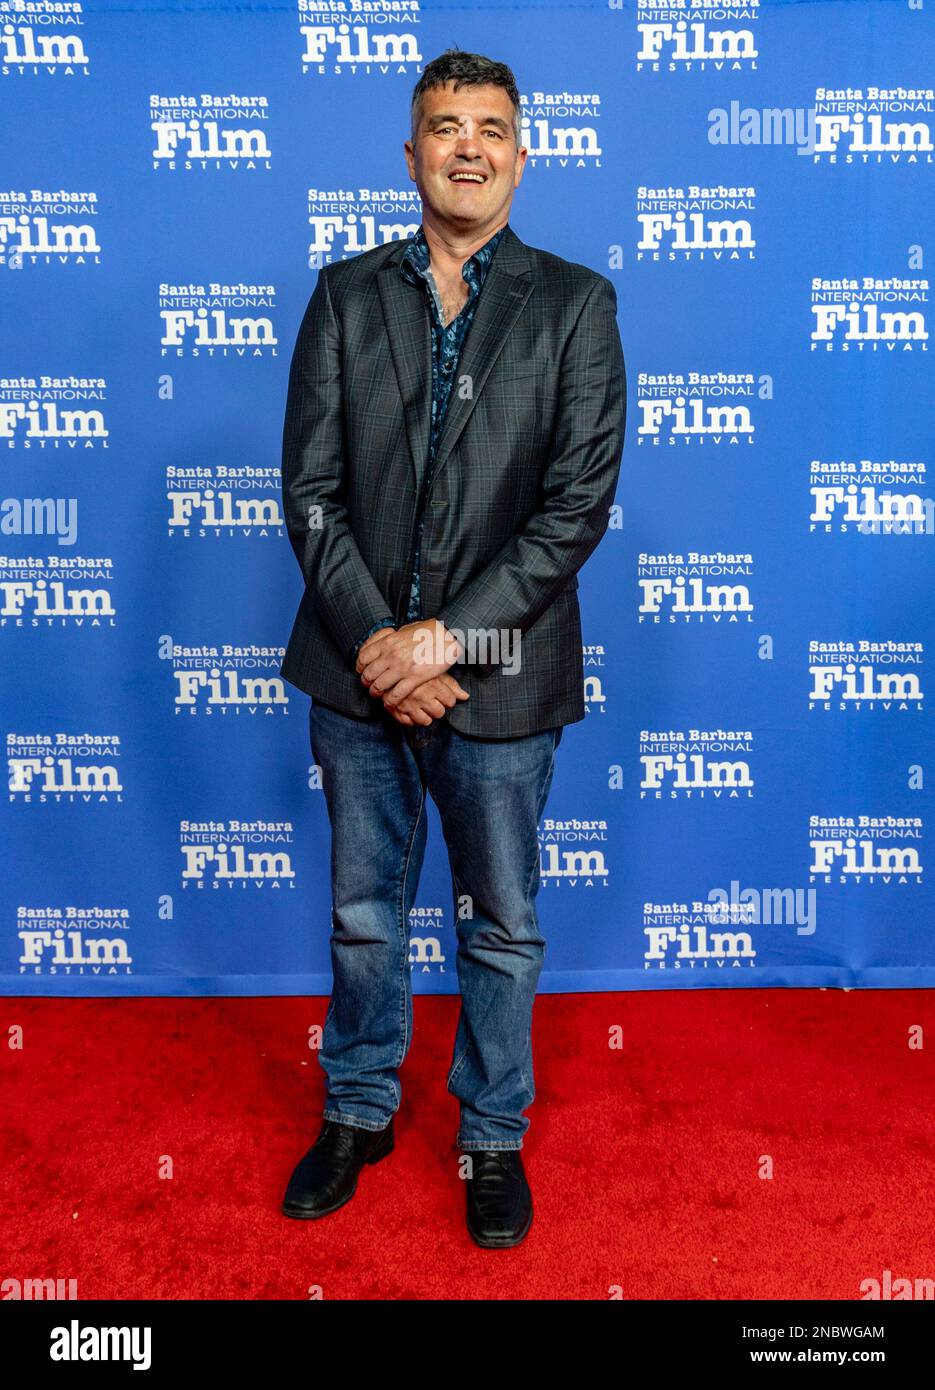 Eric Saindon – VFX (Avatar: The Way of Water) arrives at the 2023 Santa Barbara International Film Festival red carpet event in receiving the Variety Artisans Award at the Arlington Theatre on February 13, 2023 in Santa Barbara, CA. (Photo by Rod Rolle/Sipa USA) Stock Photo